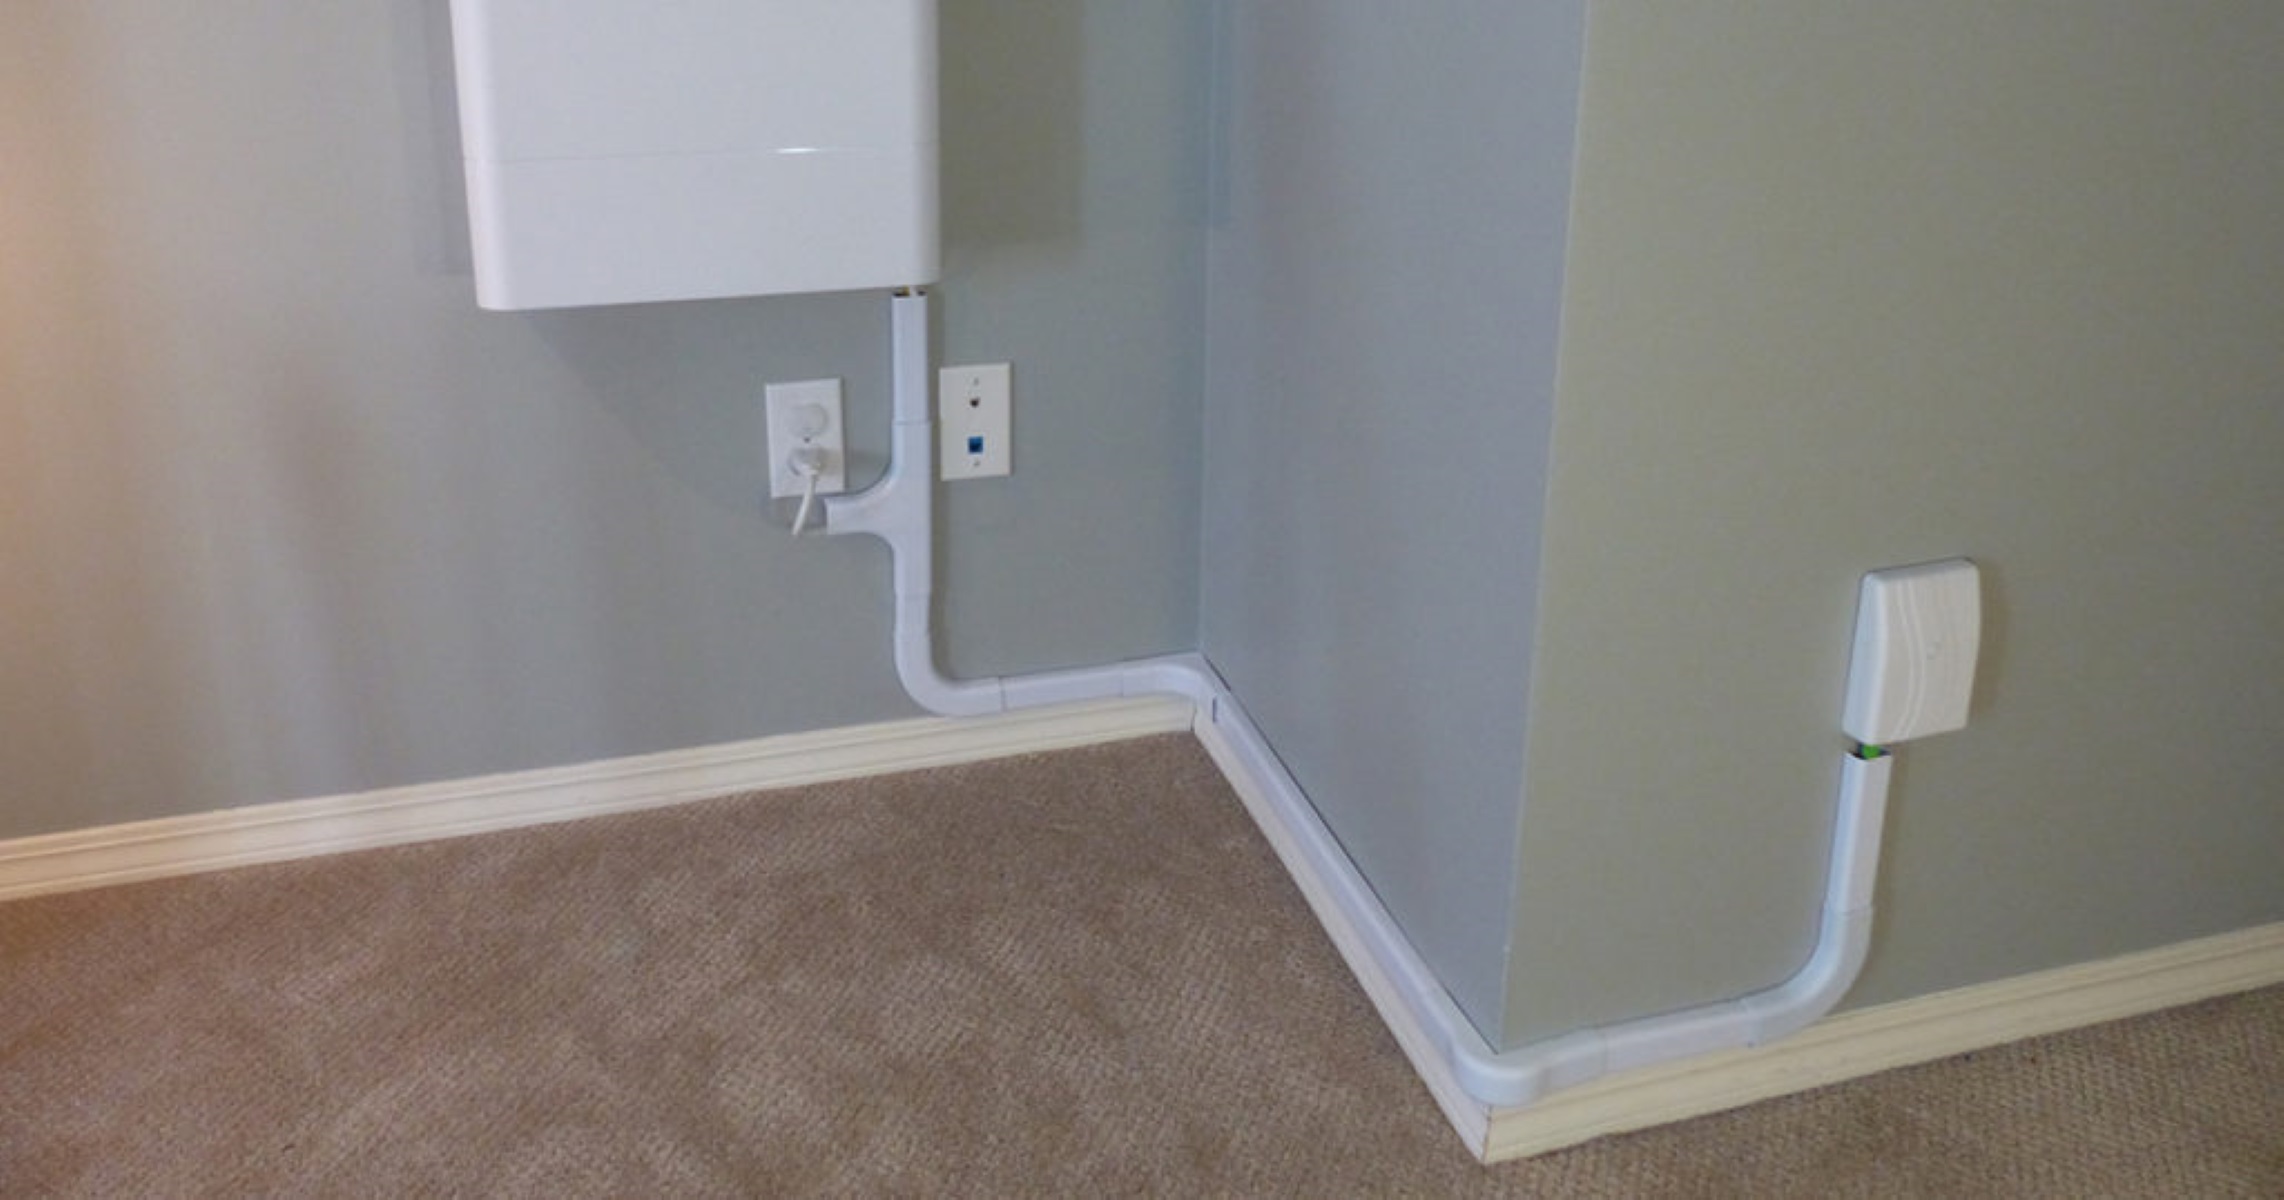 How To Attach Ethernet Cable To Wall